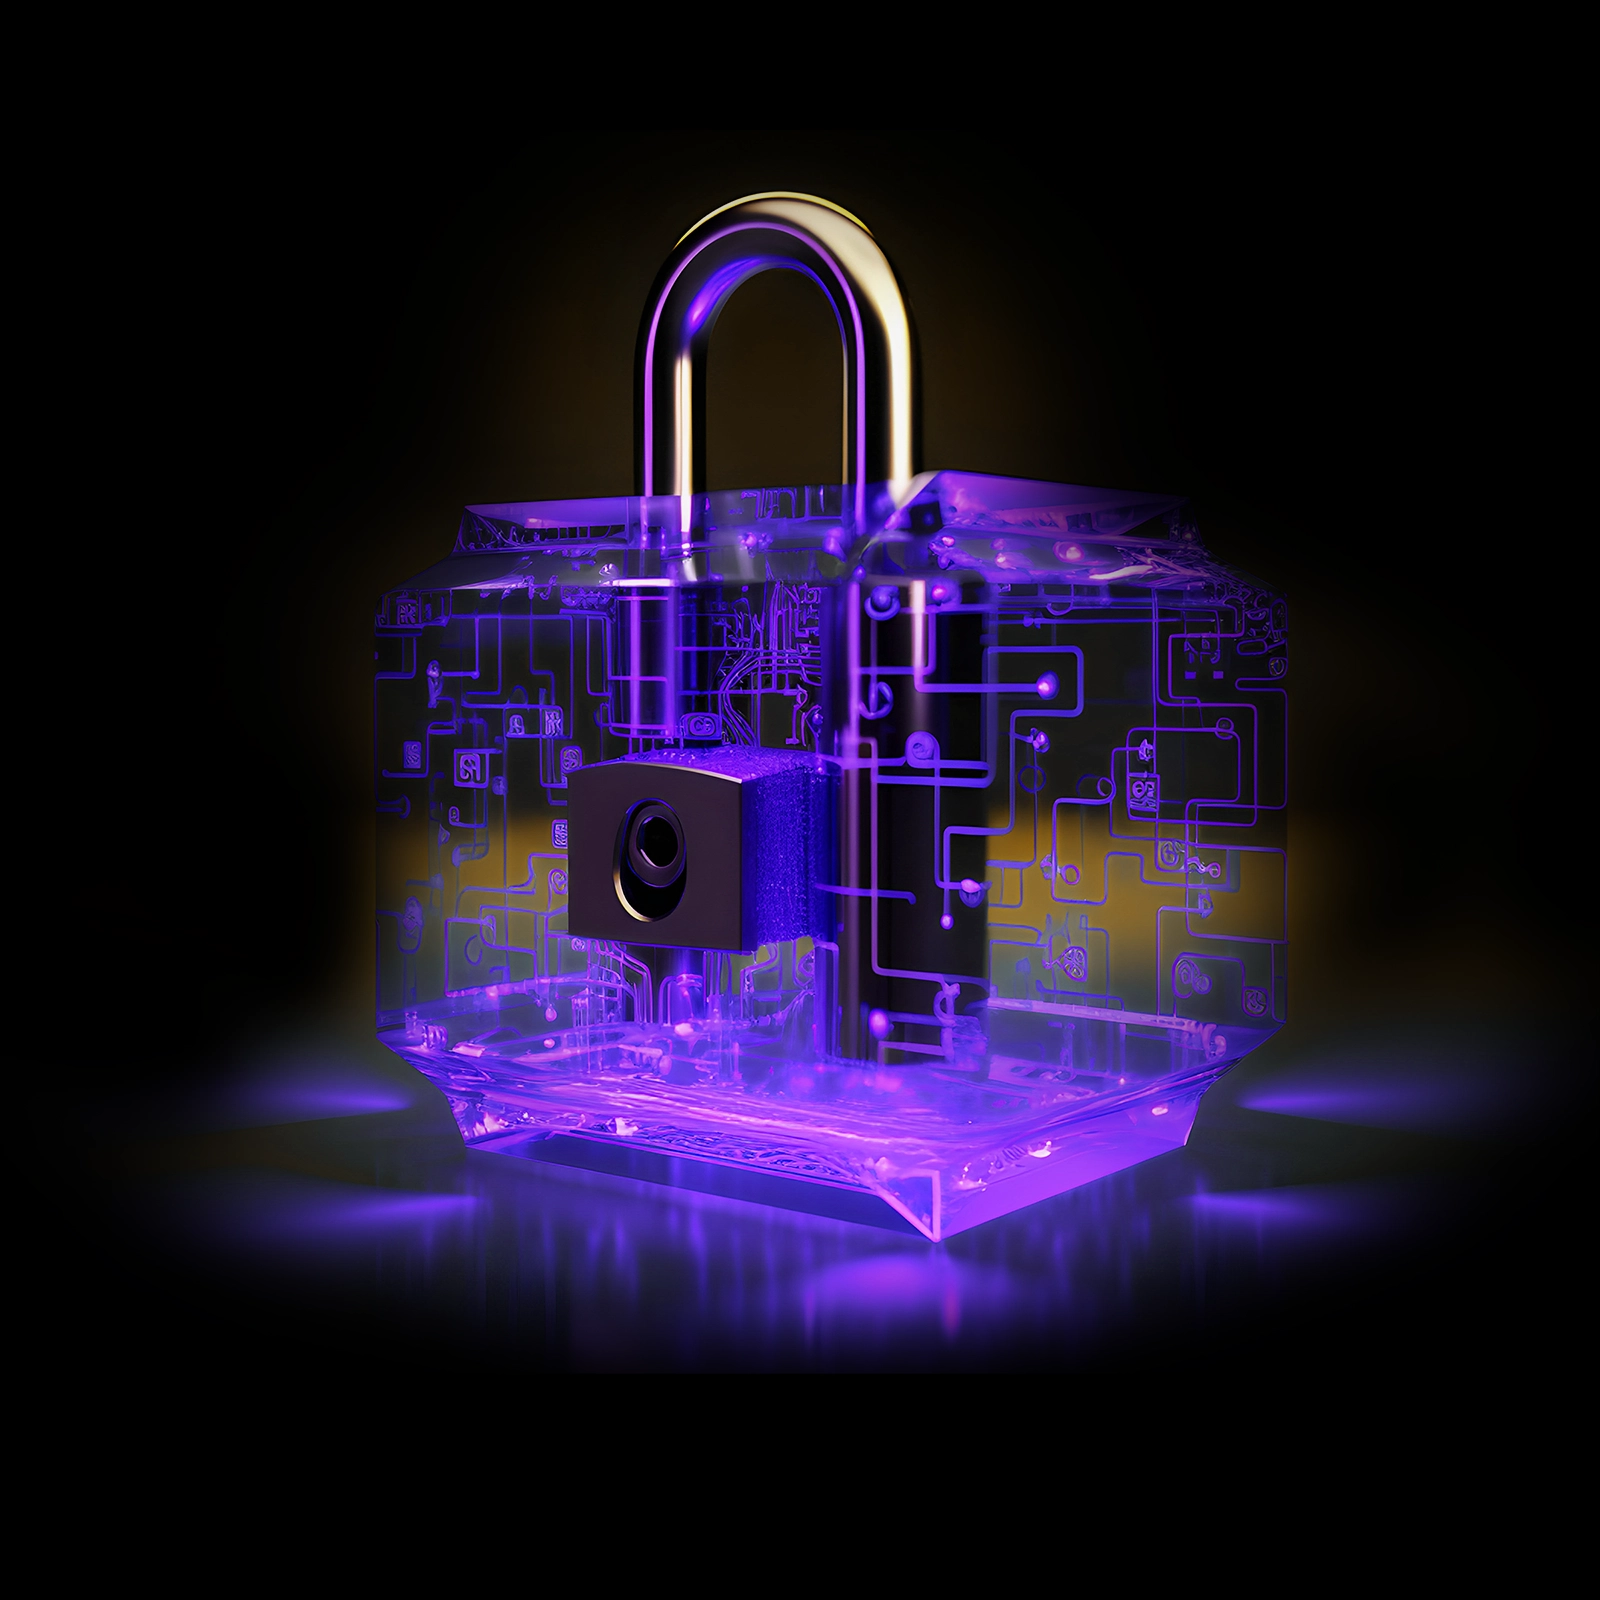 A digital padlock symbolizing the security of PDFLight, which compresses documents while ensuring file integrity and confidentiality by processing on the user's device.